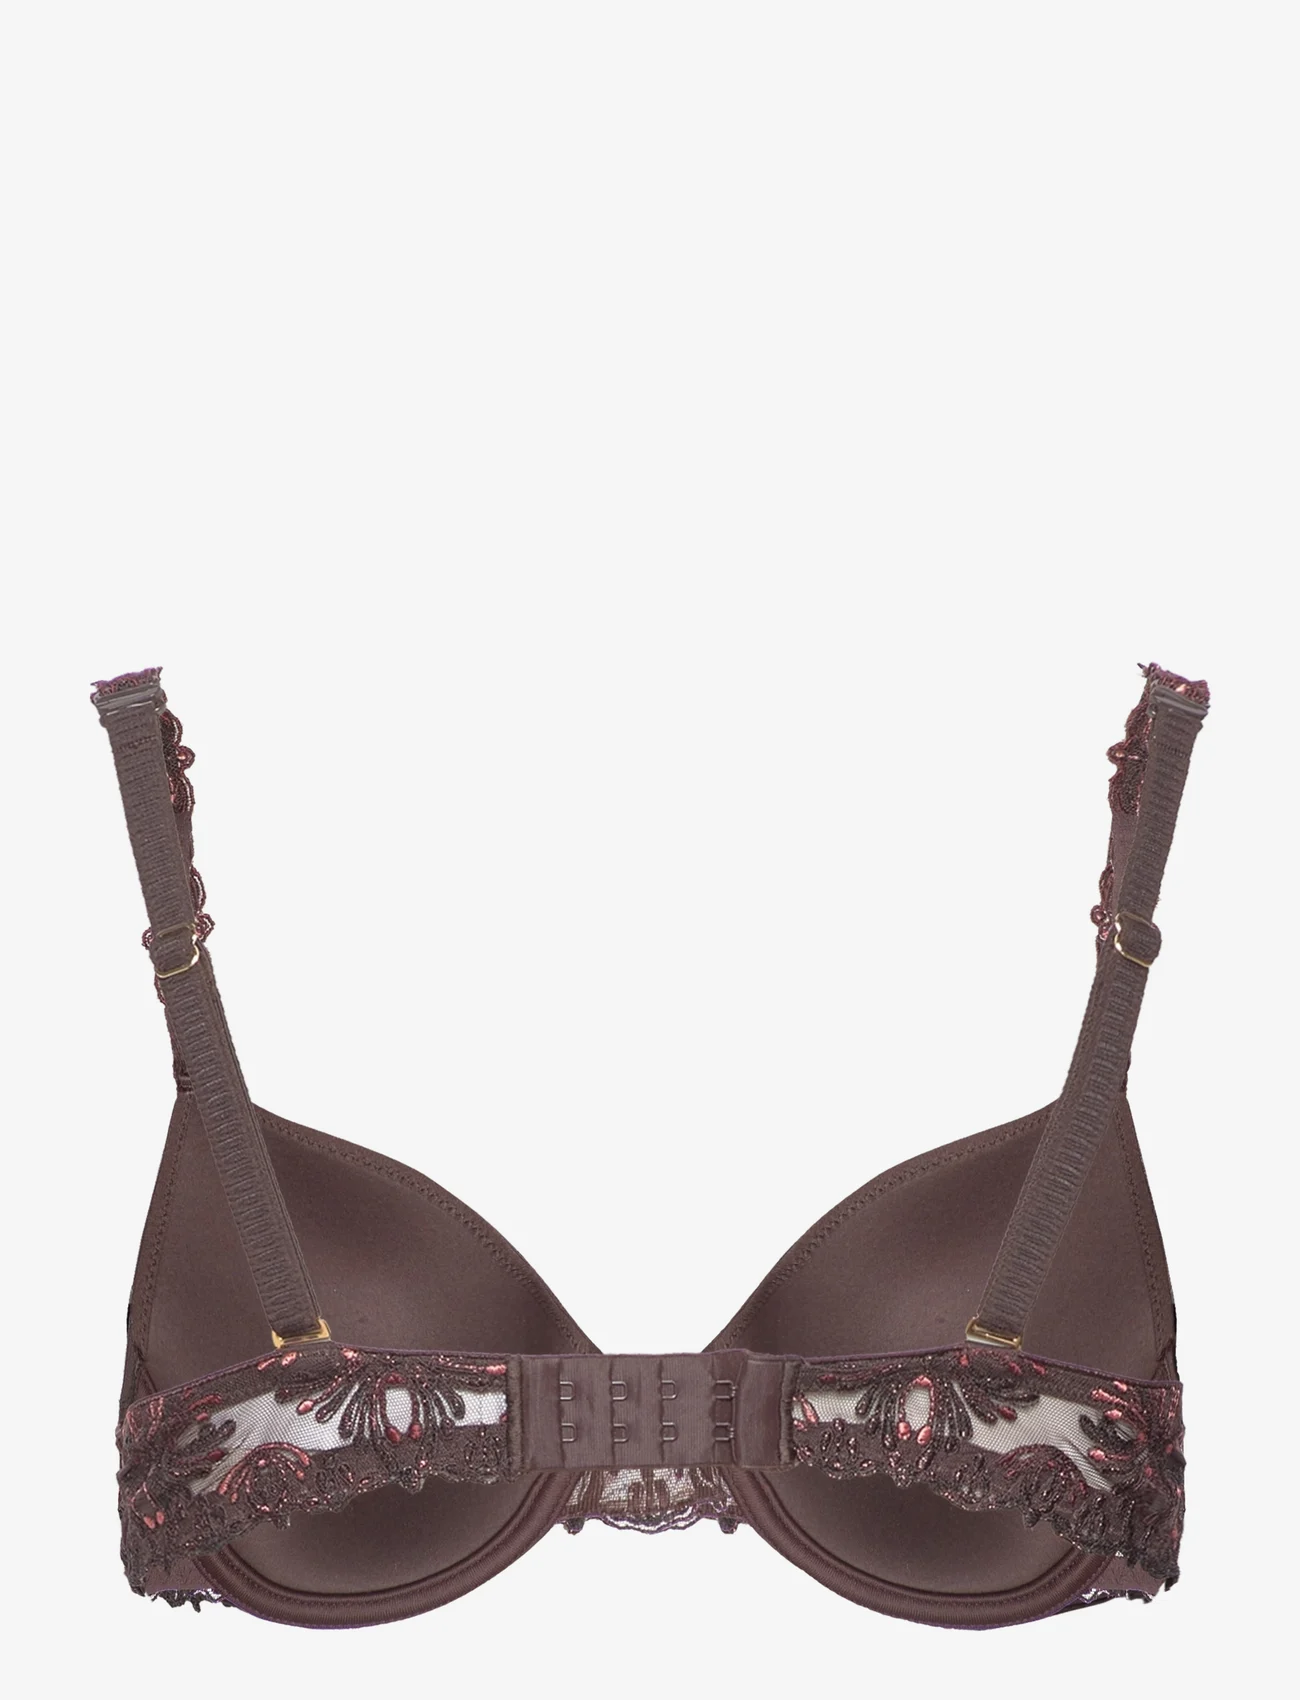 CHANTELLE - Champs Elysees Covering Memory Bra - t-shirts bras - glossy brown - 1